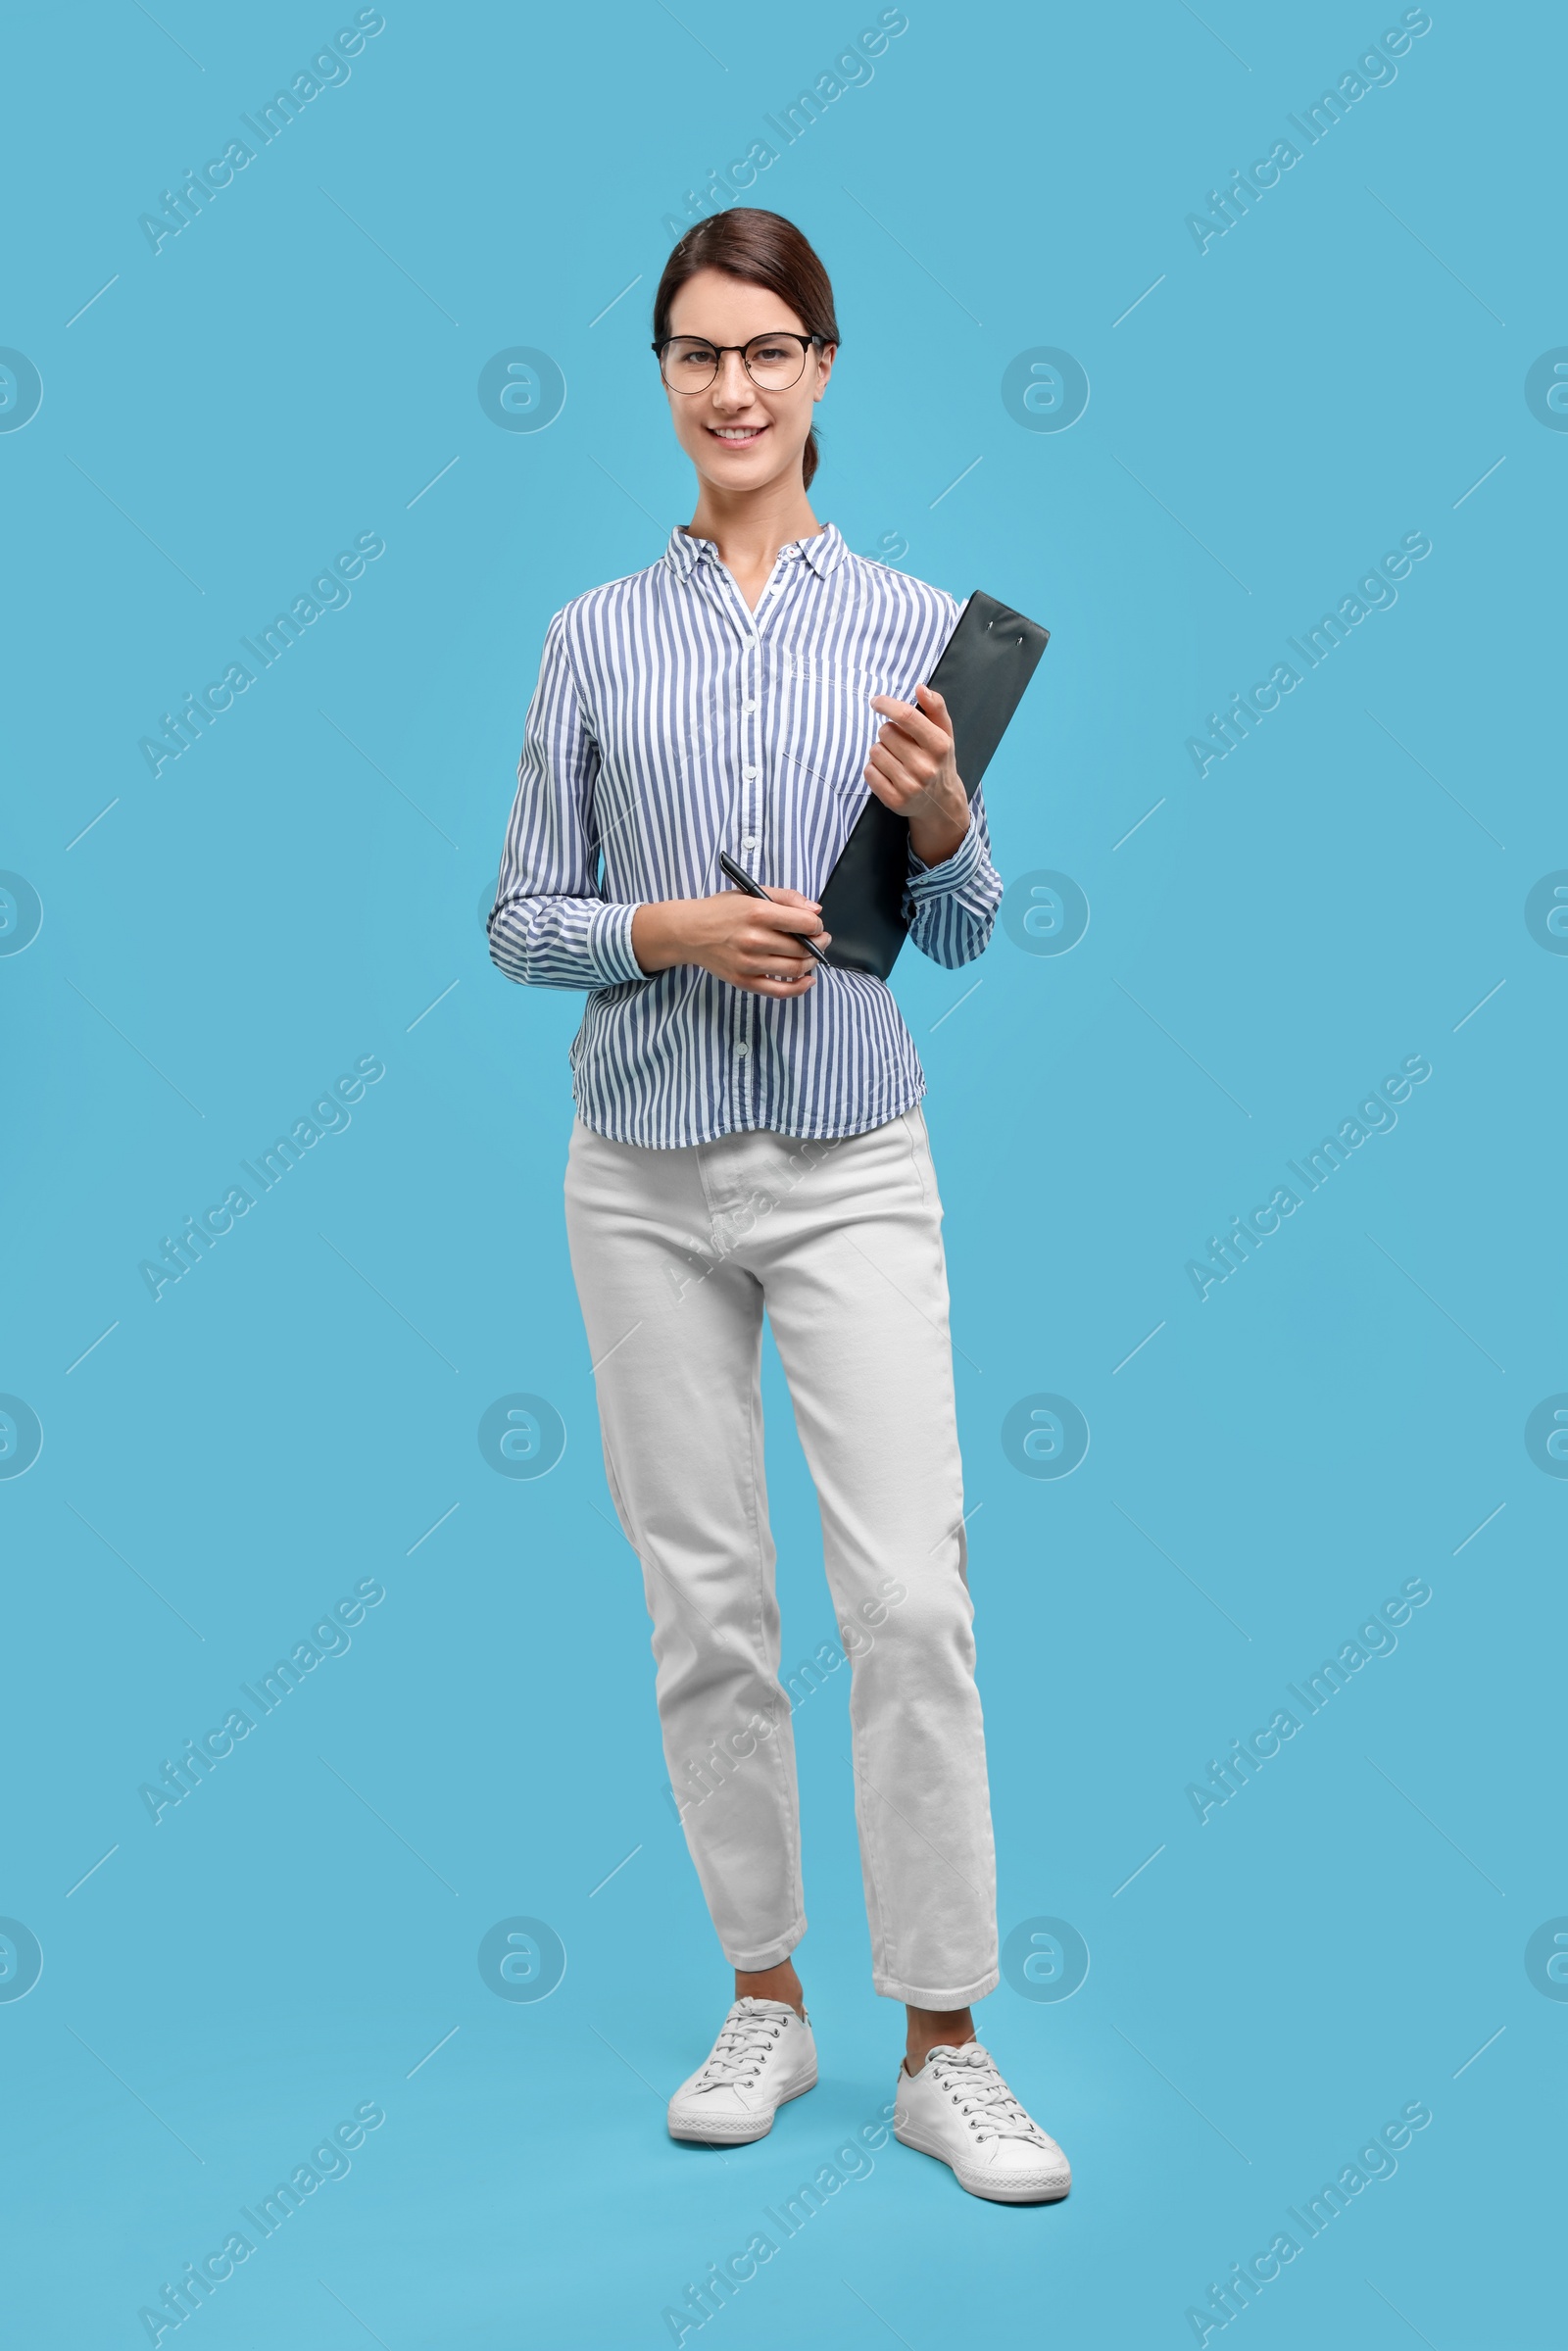 Photo of Happy secretary with clipboard and pen on light blue background